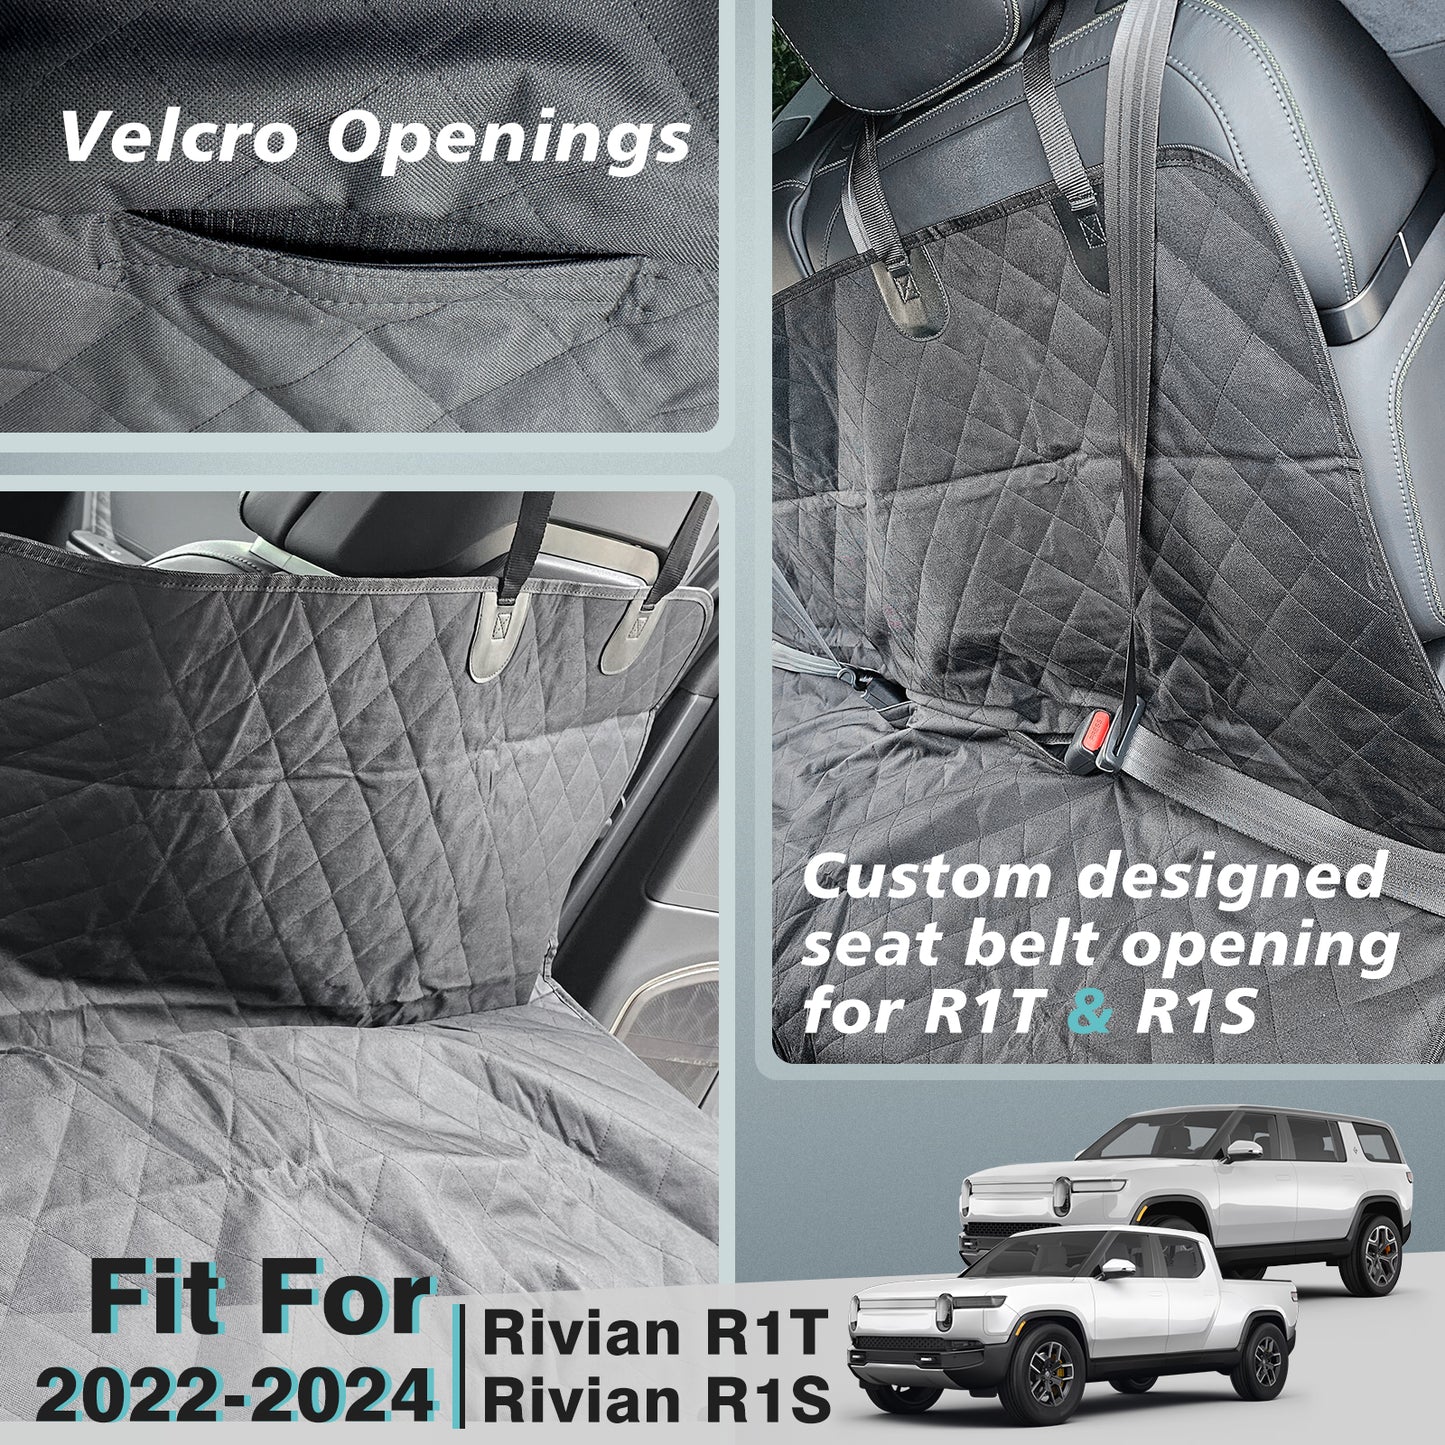 Pet Seat Cover Dog compatible with Rivian from BestEvMod